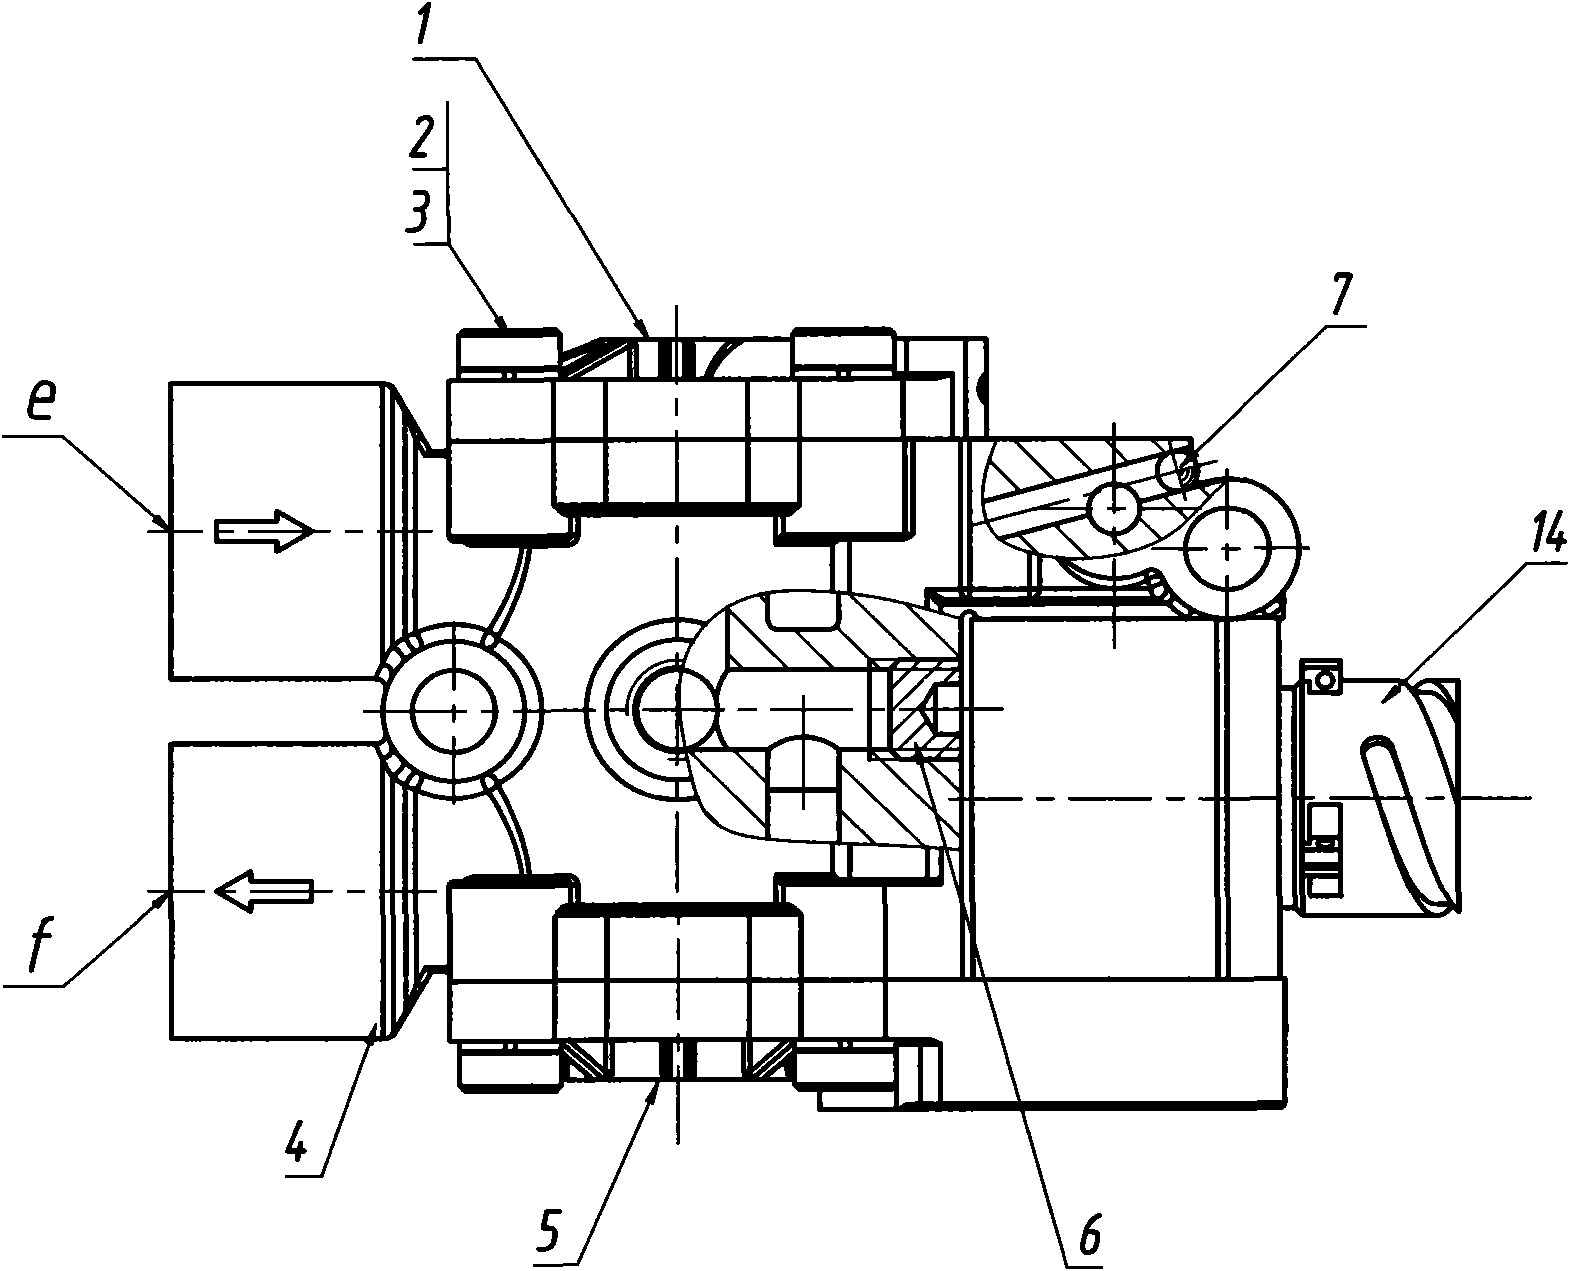 Inflation/deflation valve assembly for central tire inflation/deflation system of automobile